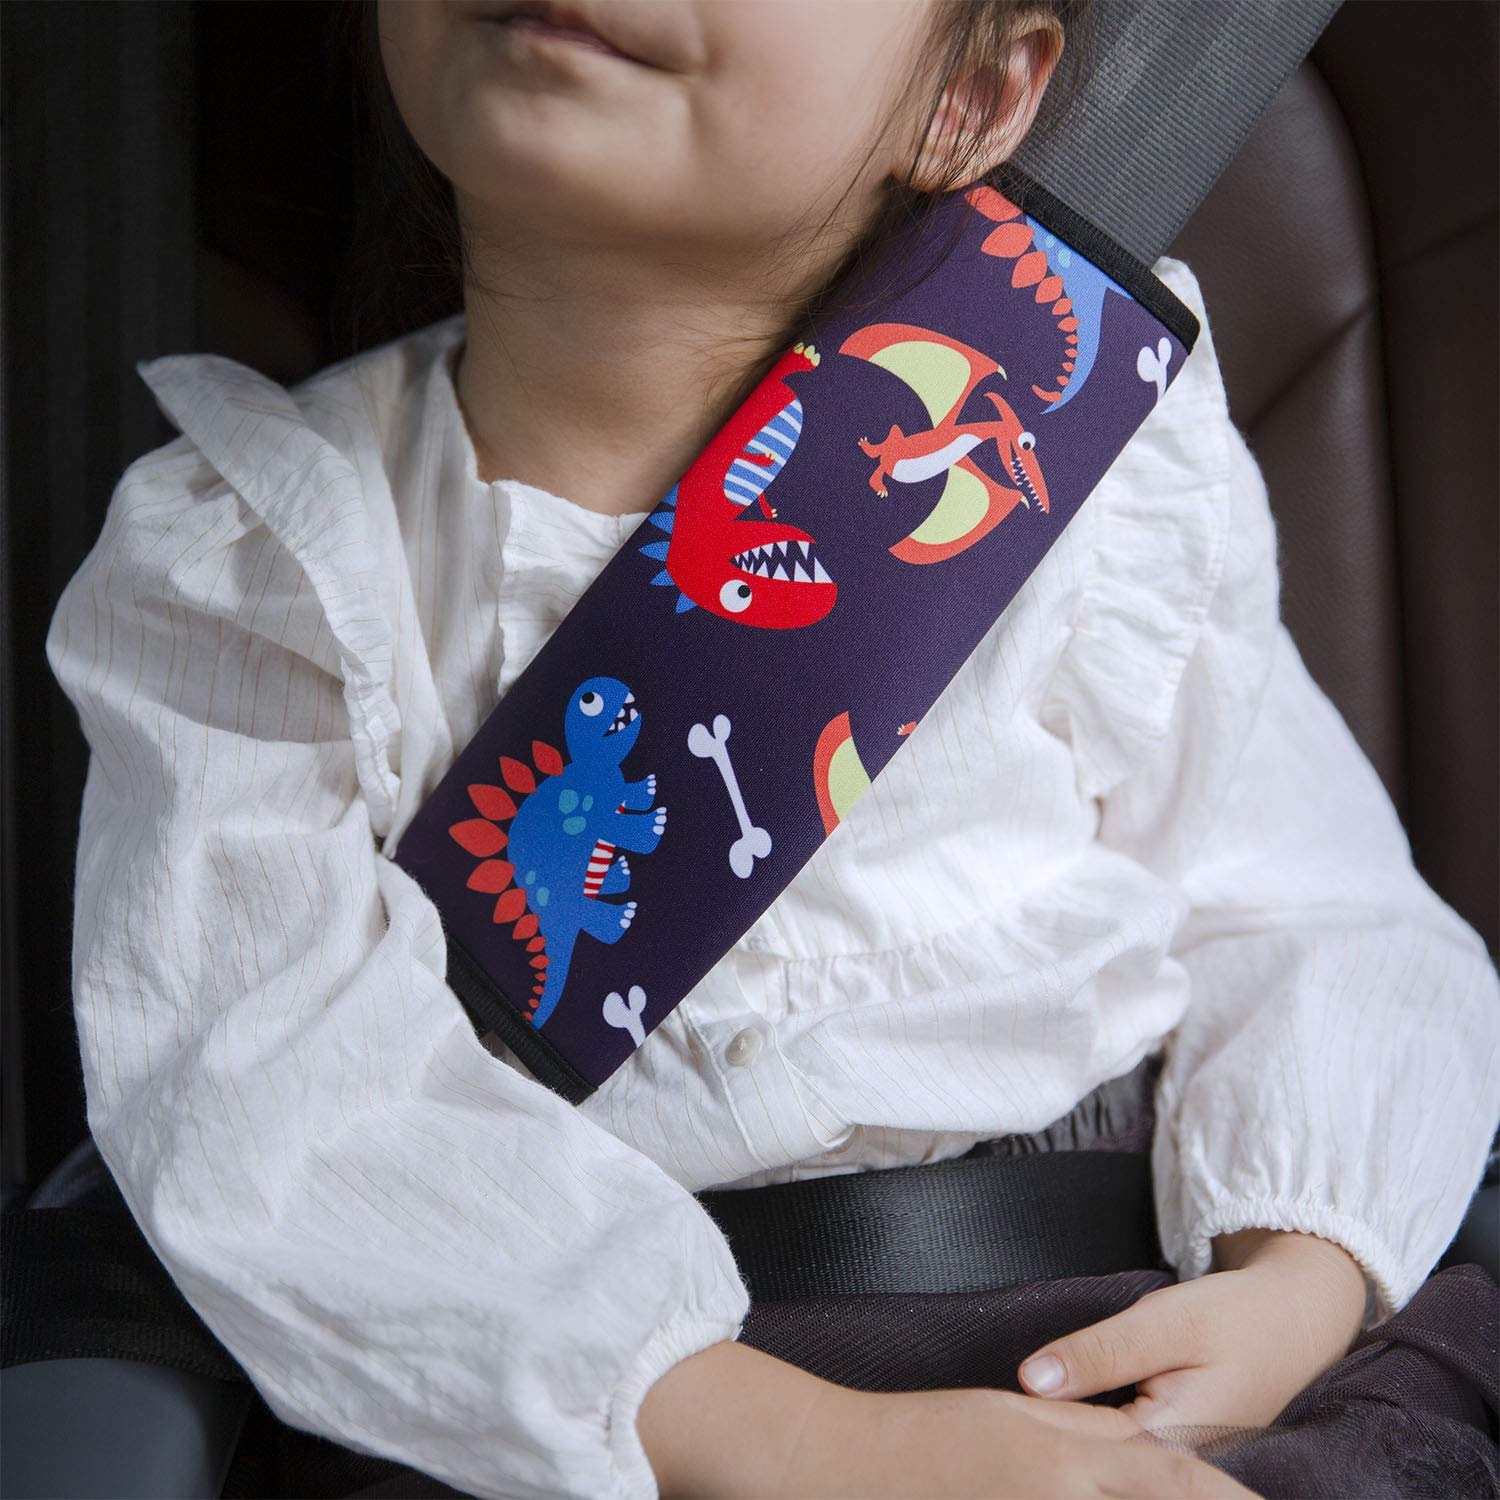 Drydiet 4 Pieces Baby Seat Belt Covers Soft Car Seat Straps Shoulder Pads for Baby Kids Car Seat Belt Pad Seatbelt Covers Cushion for Girls and Boys 